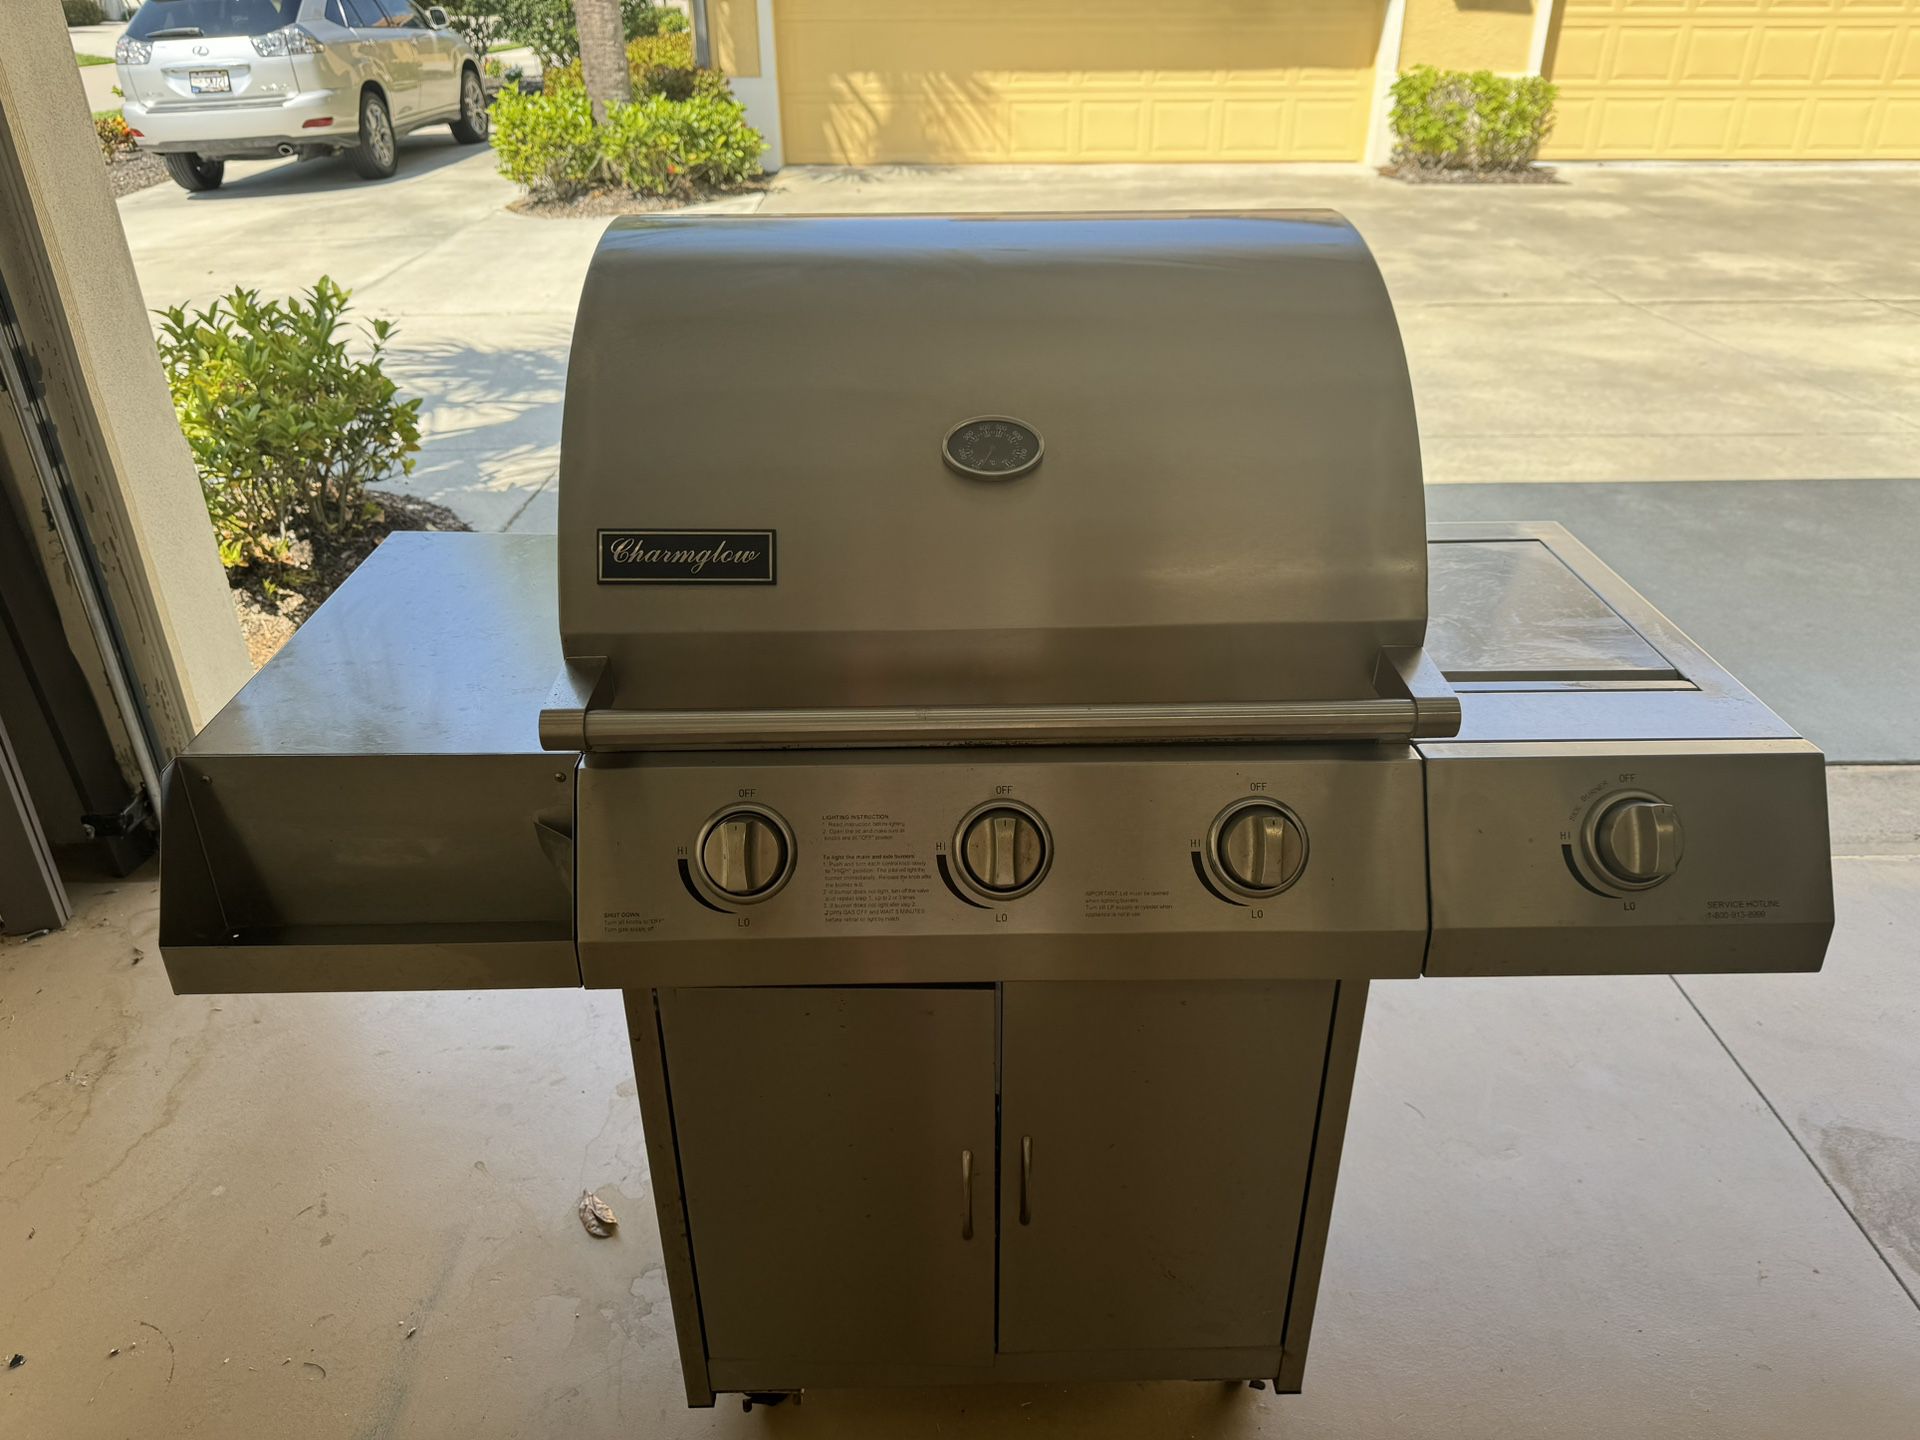 Stainless Steel Gas Grill